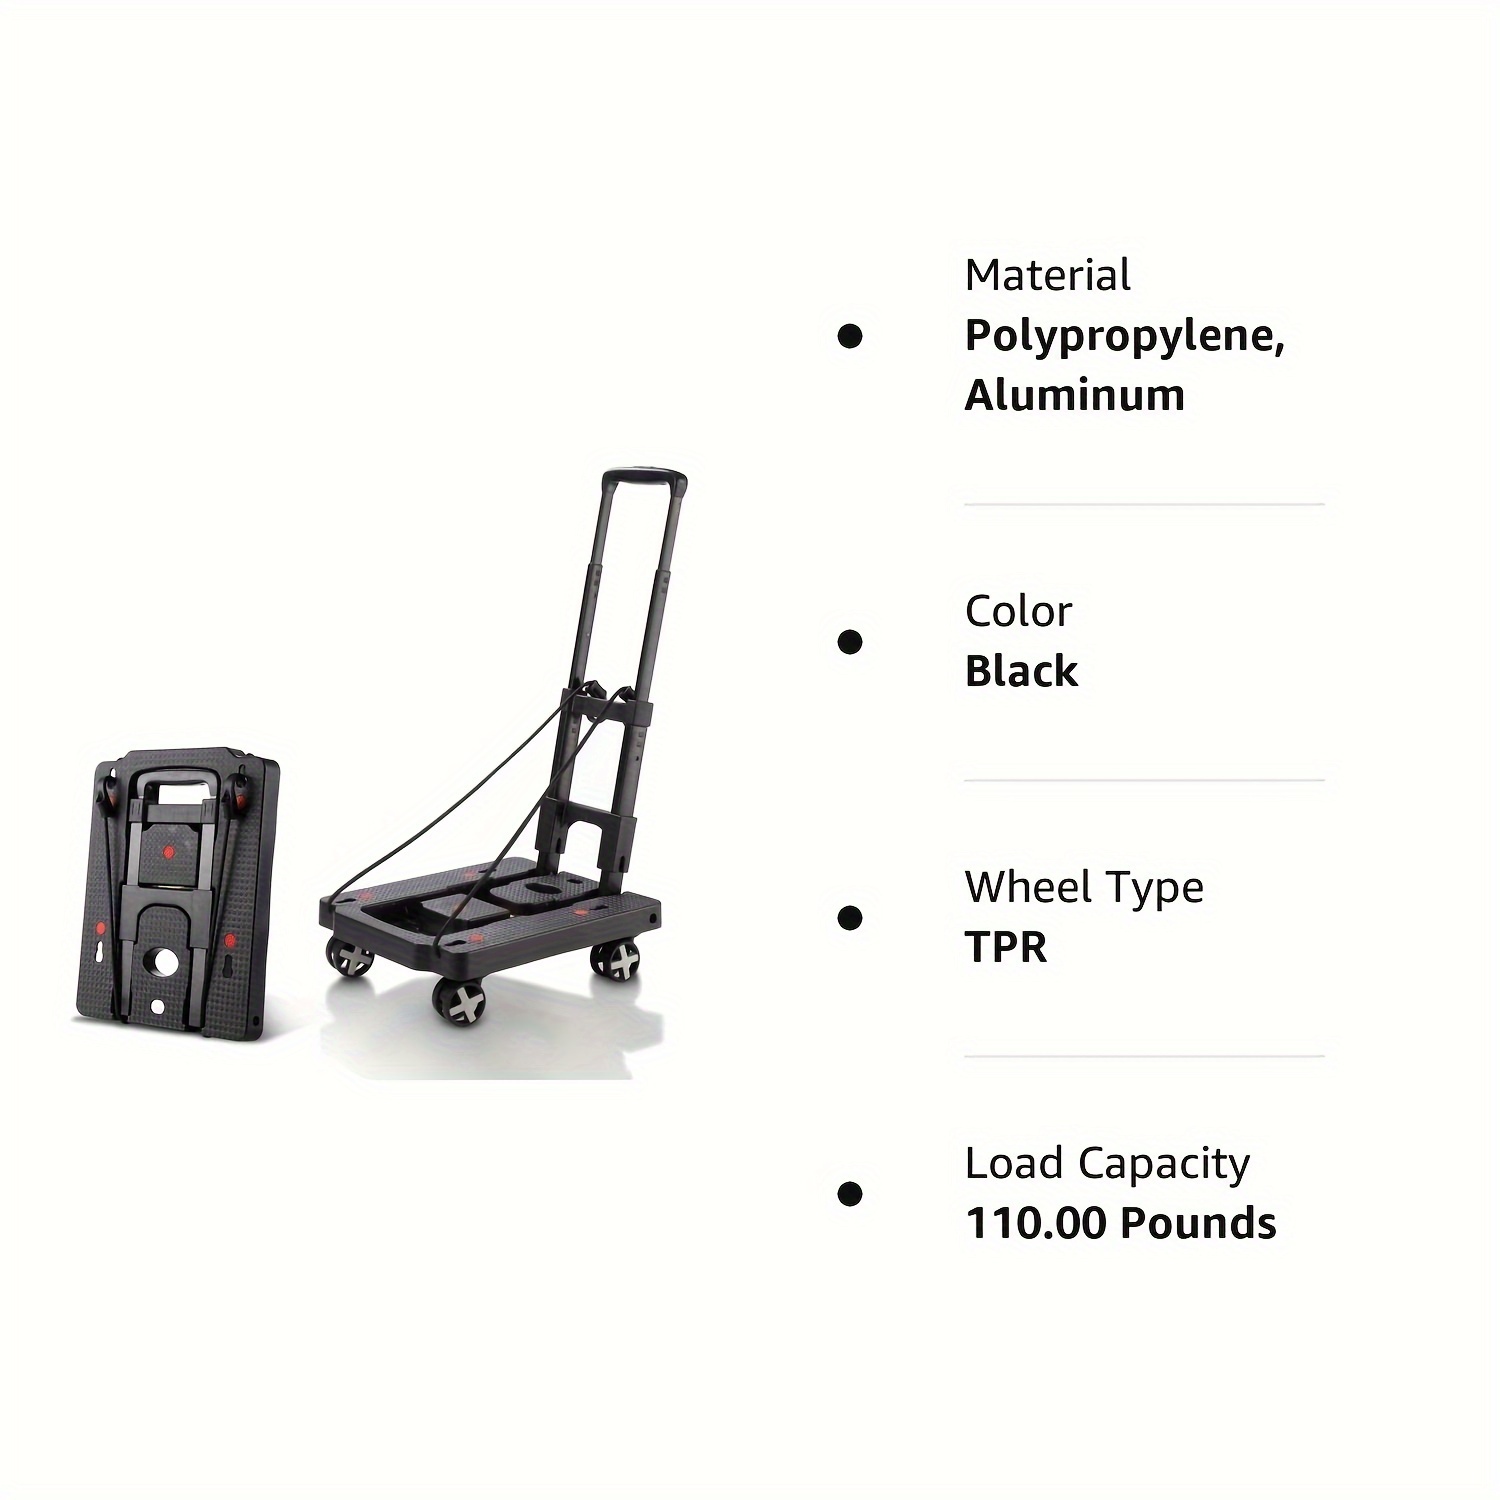 folding hand truck lightweight dolly foldable luggage cart with 4 rotating wheels utility cart with adjustable handle collapsible dolly for moving travel shopping airport office